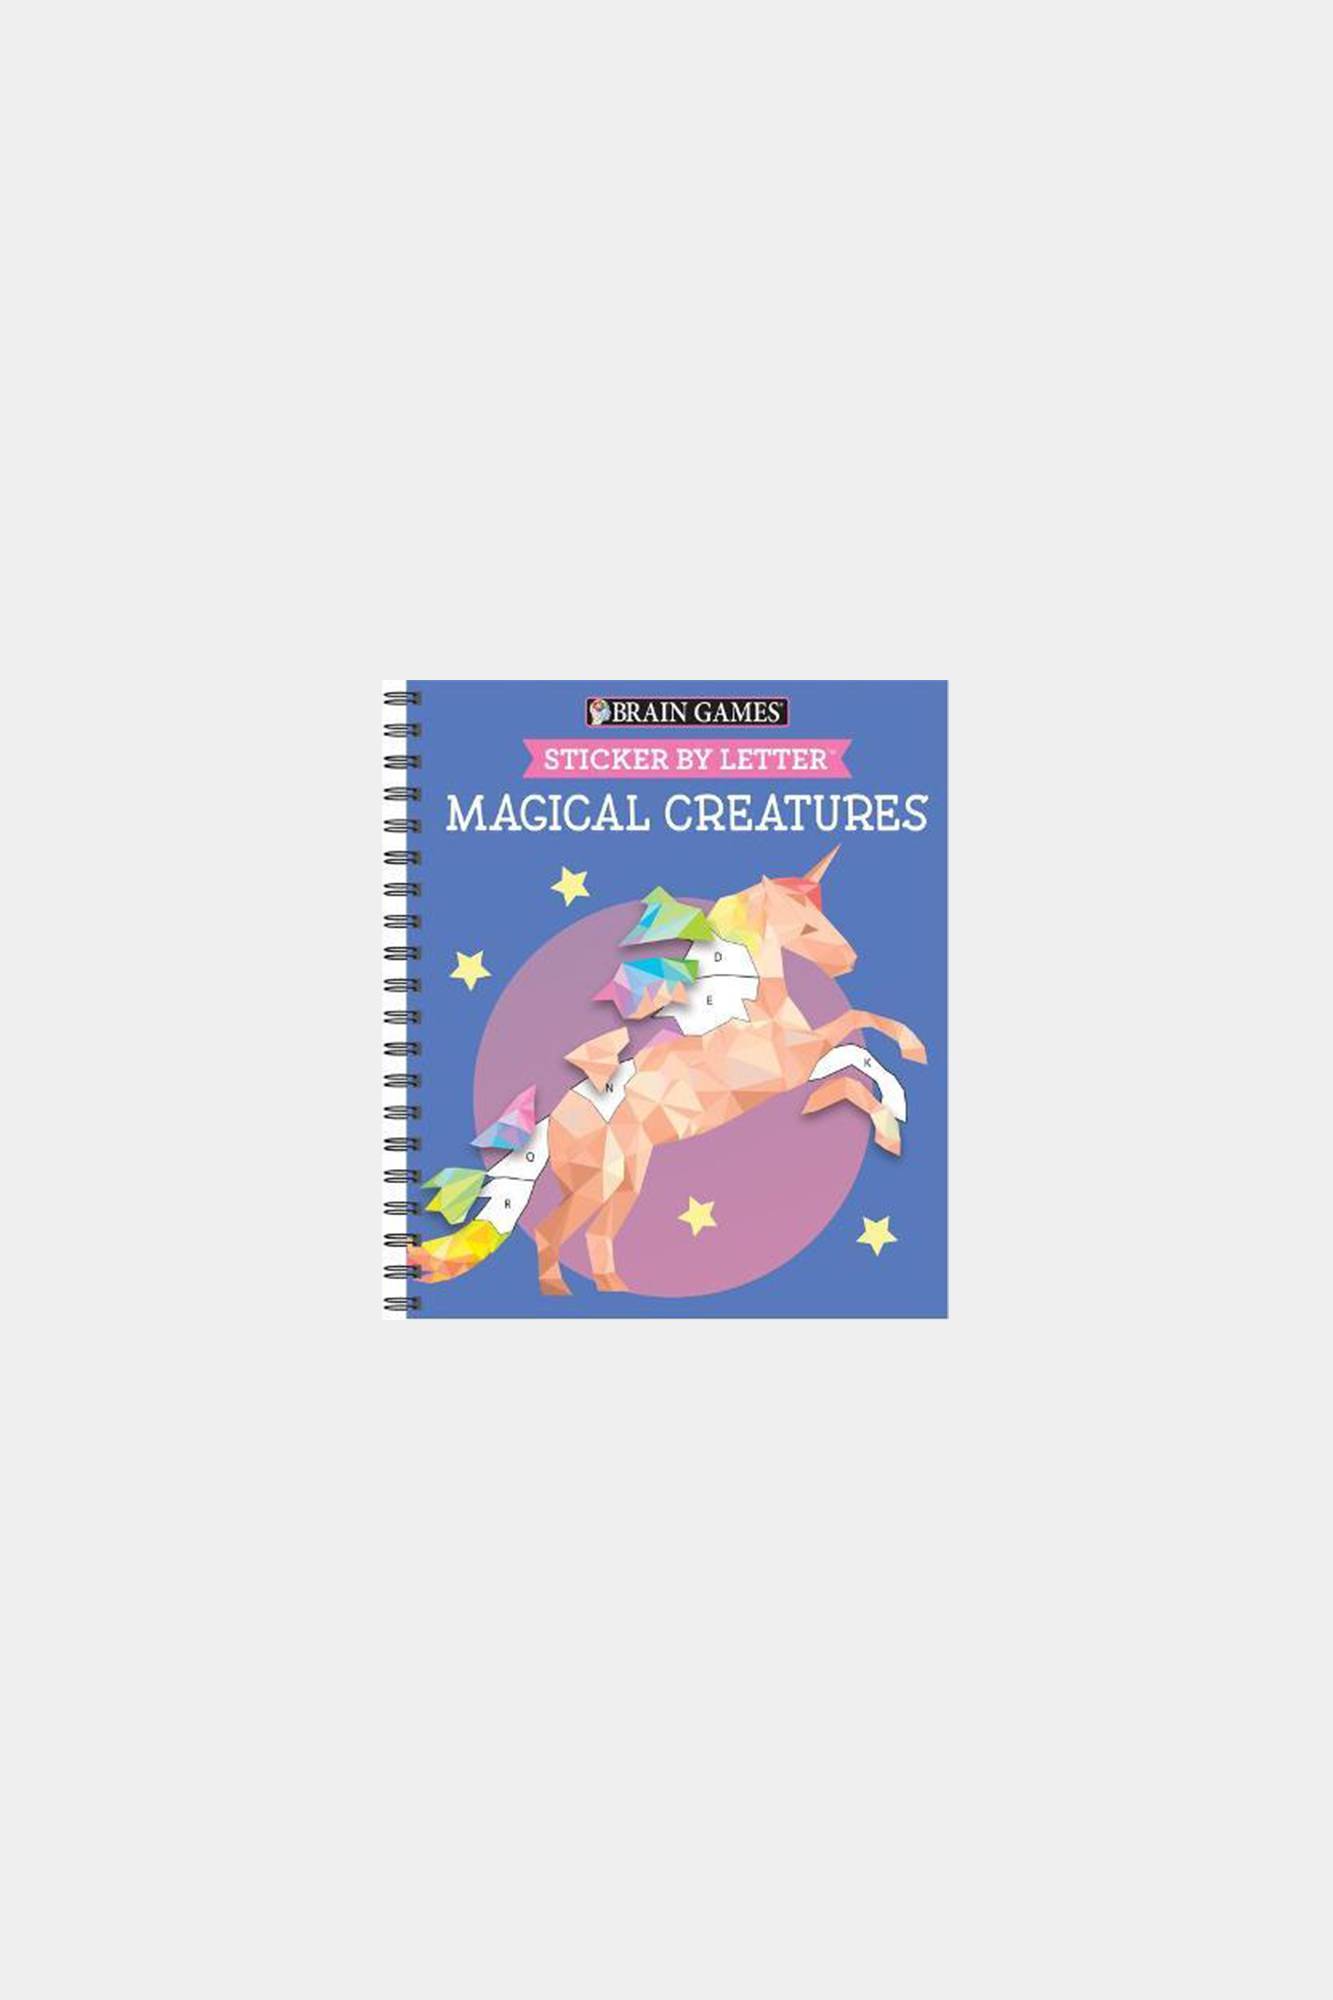 Brain Games - Sticker by Letter: Magical Creatures